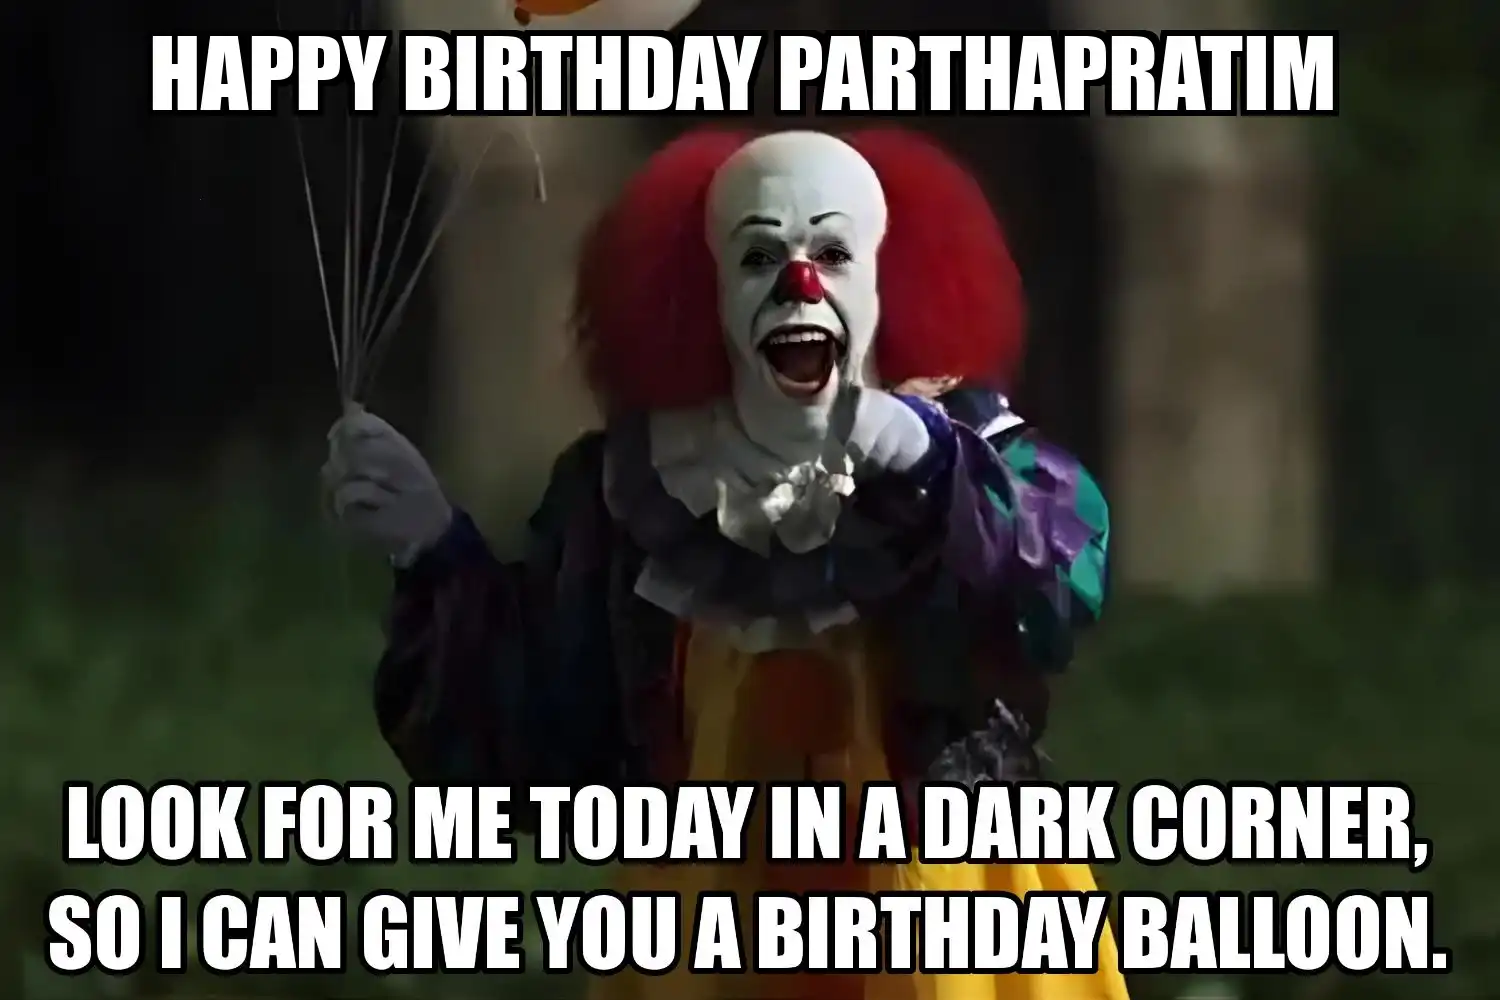 Happy Birthday Parthapratim I Can Give You A Balloon Meme